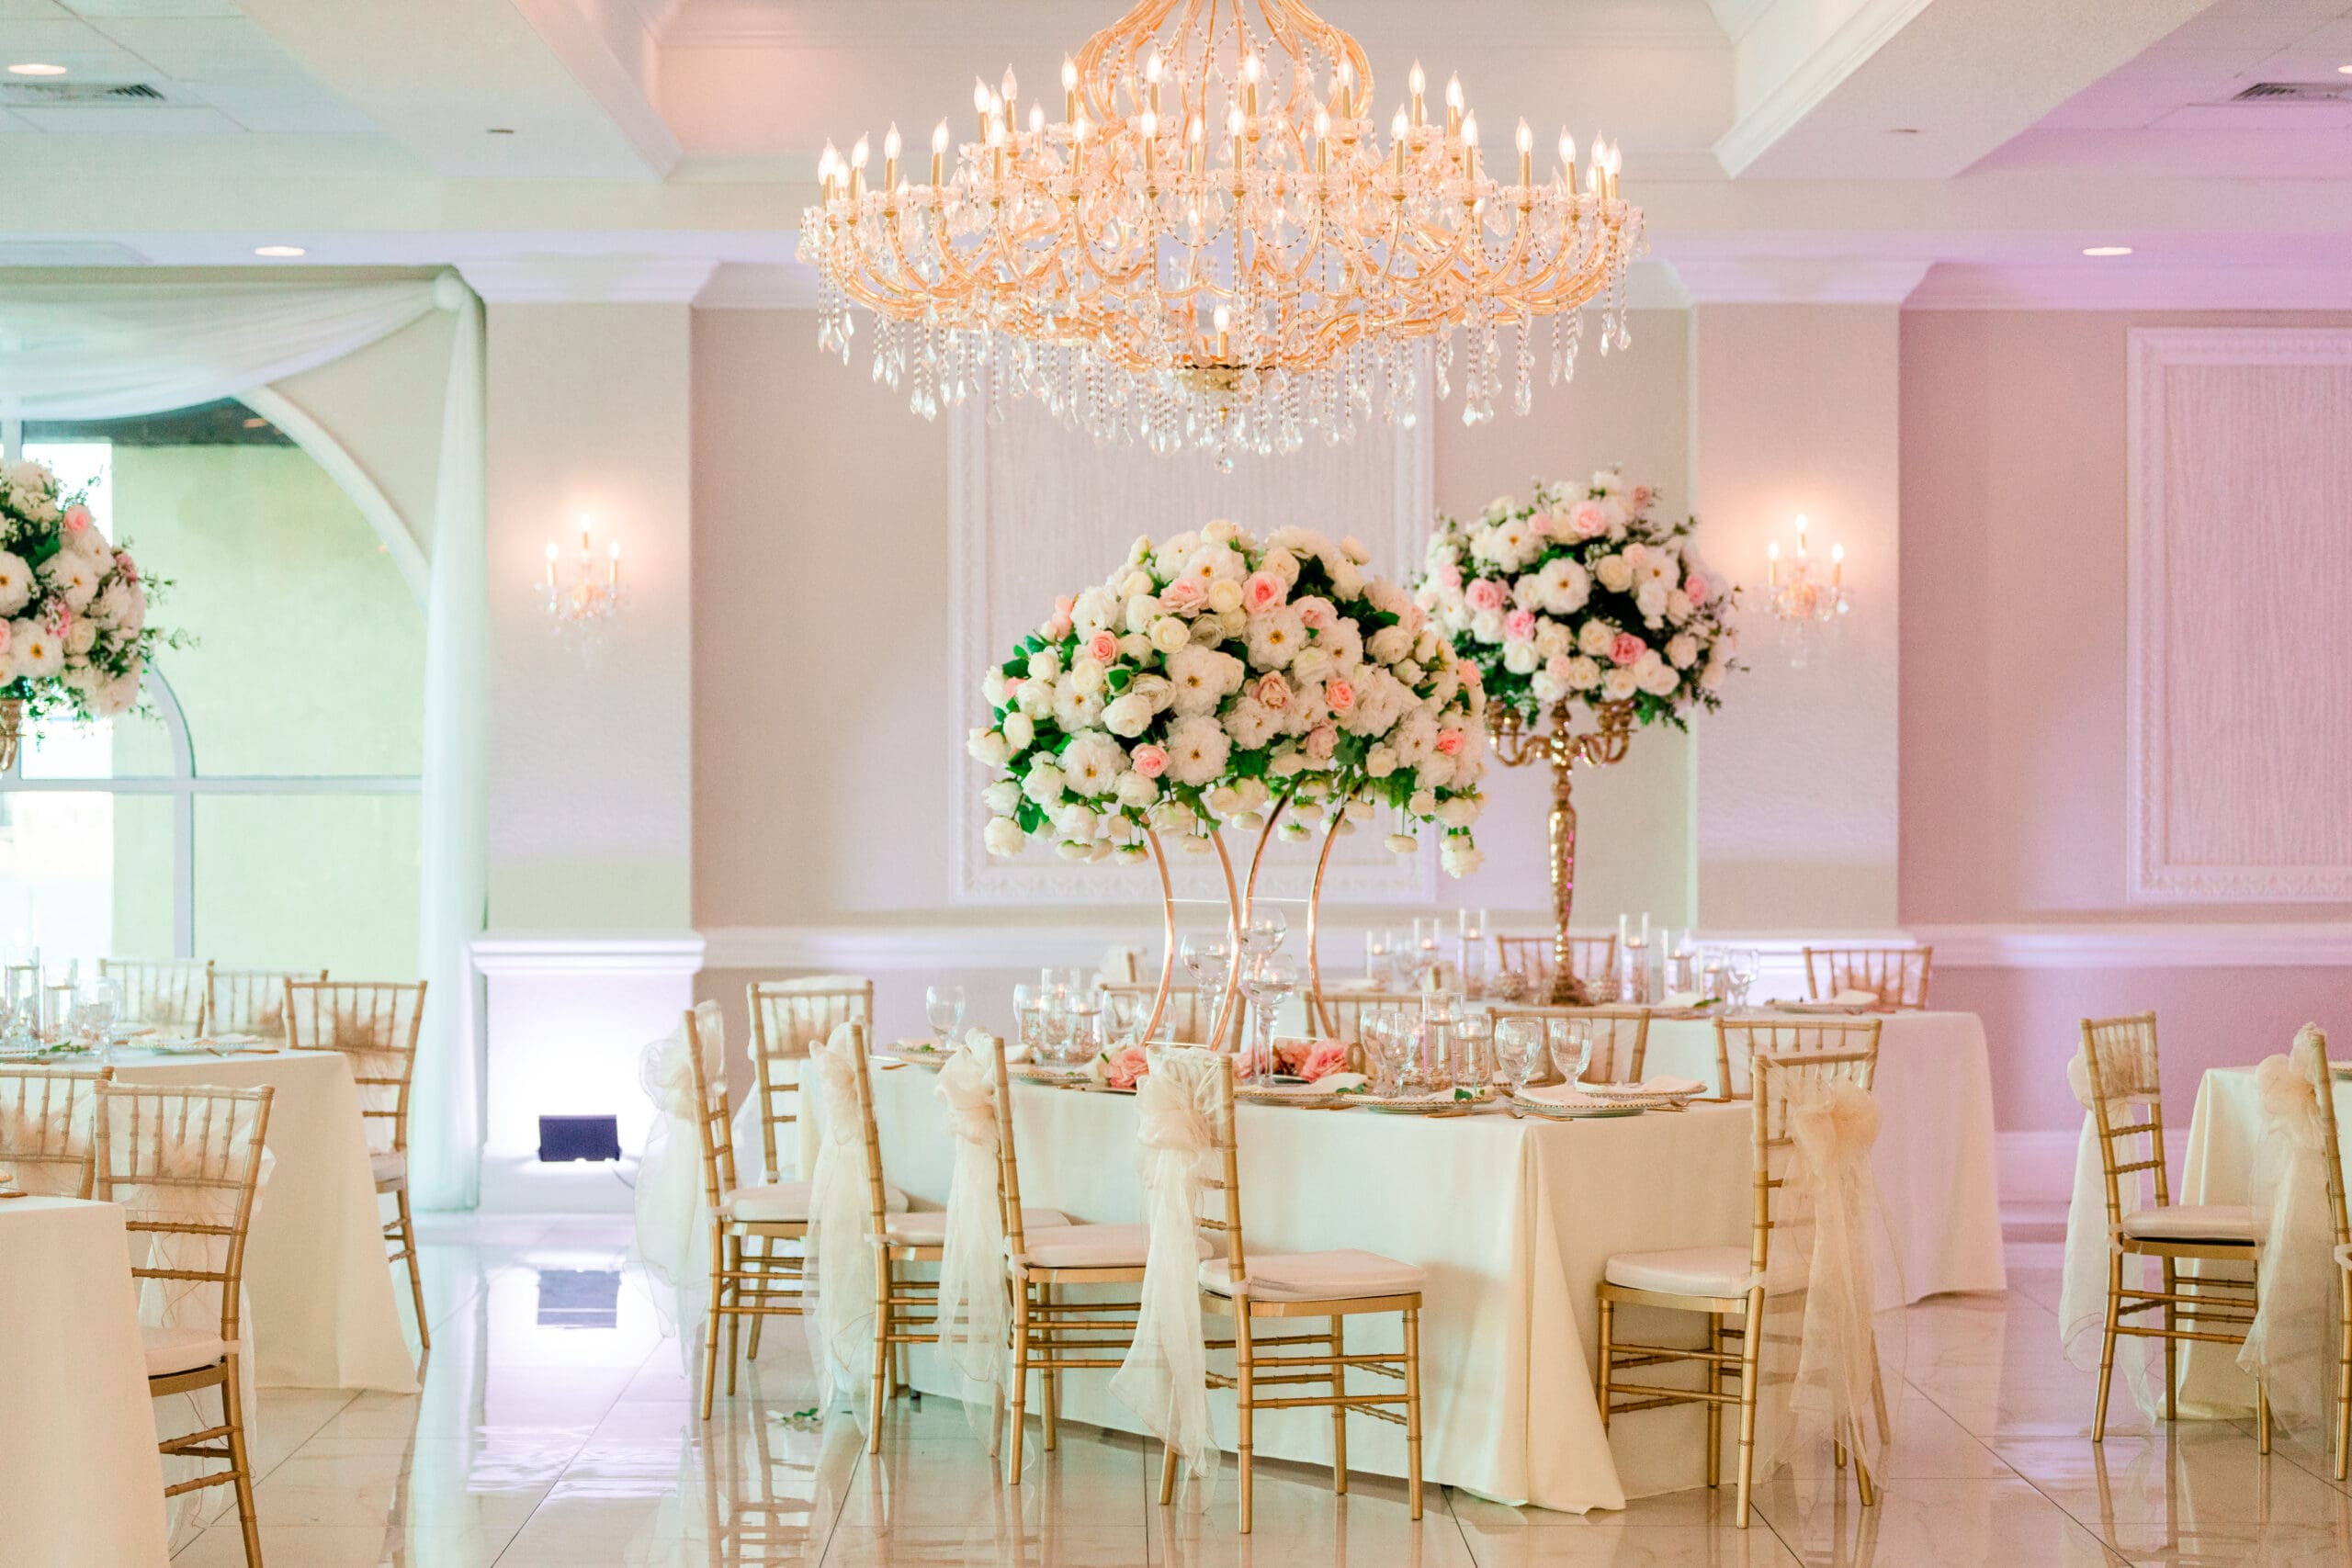 View of guests' tables adorned with large bouquets of white and pink flowers, white tablecloths, and chairs with white bows and veil-like drapes at the Crystal Ballroom.